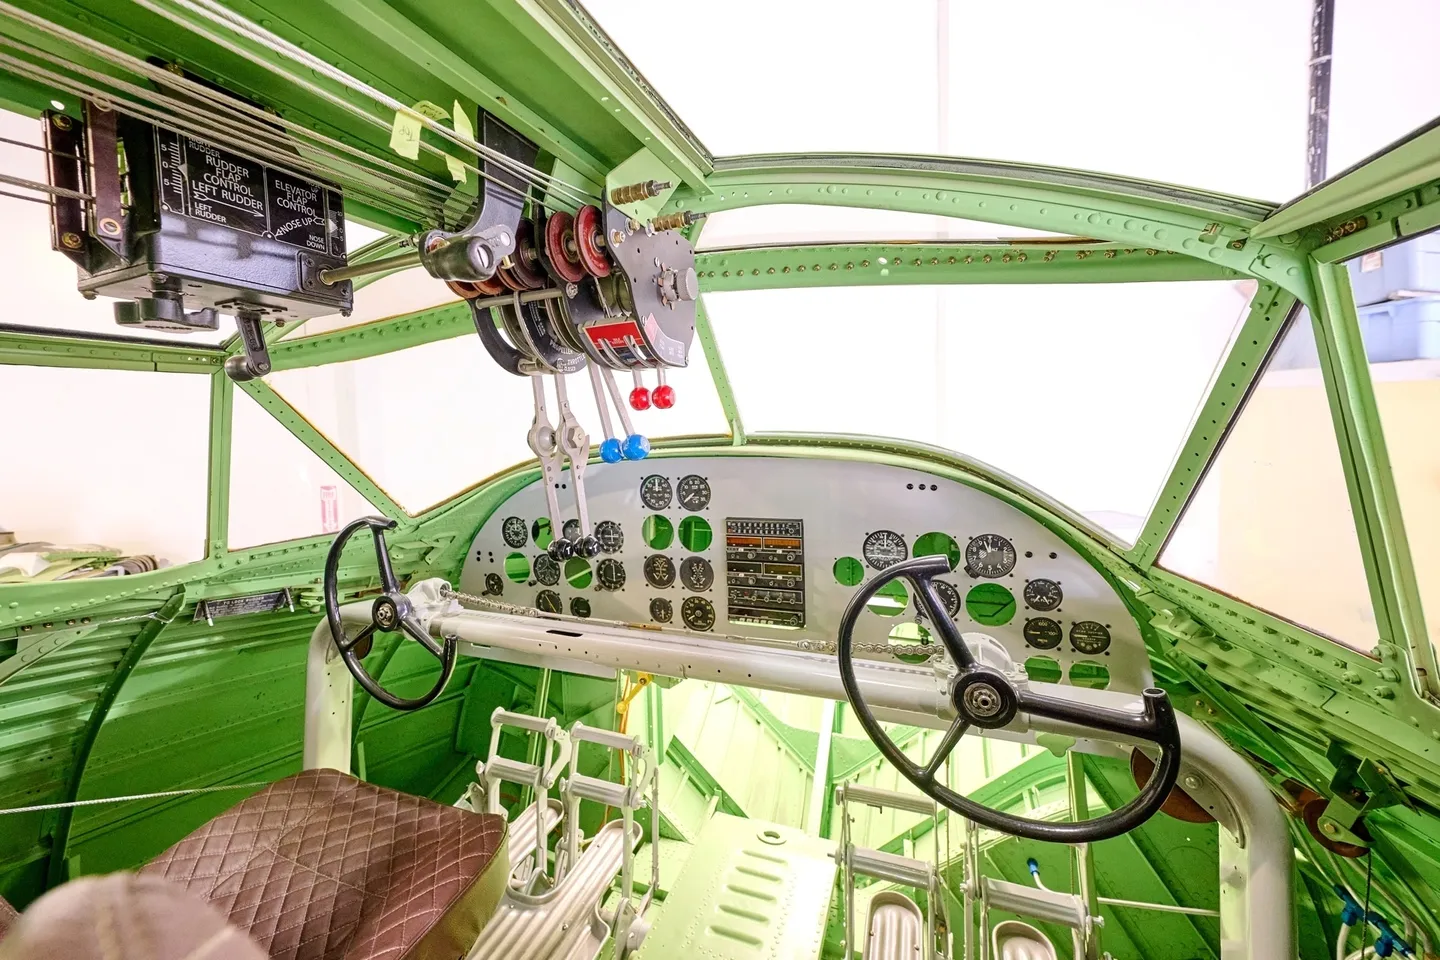 A green airplane cockpit with controls and switches.